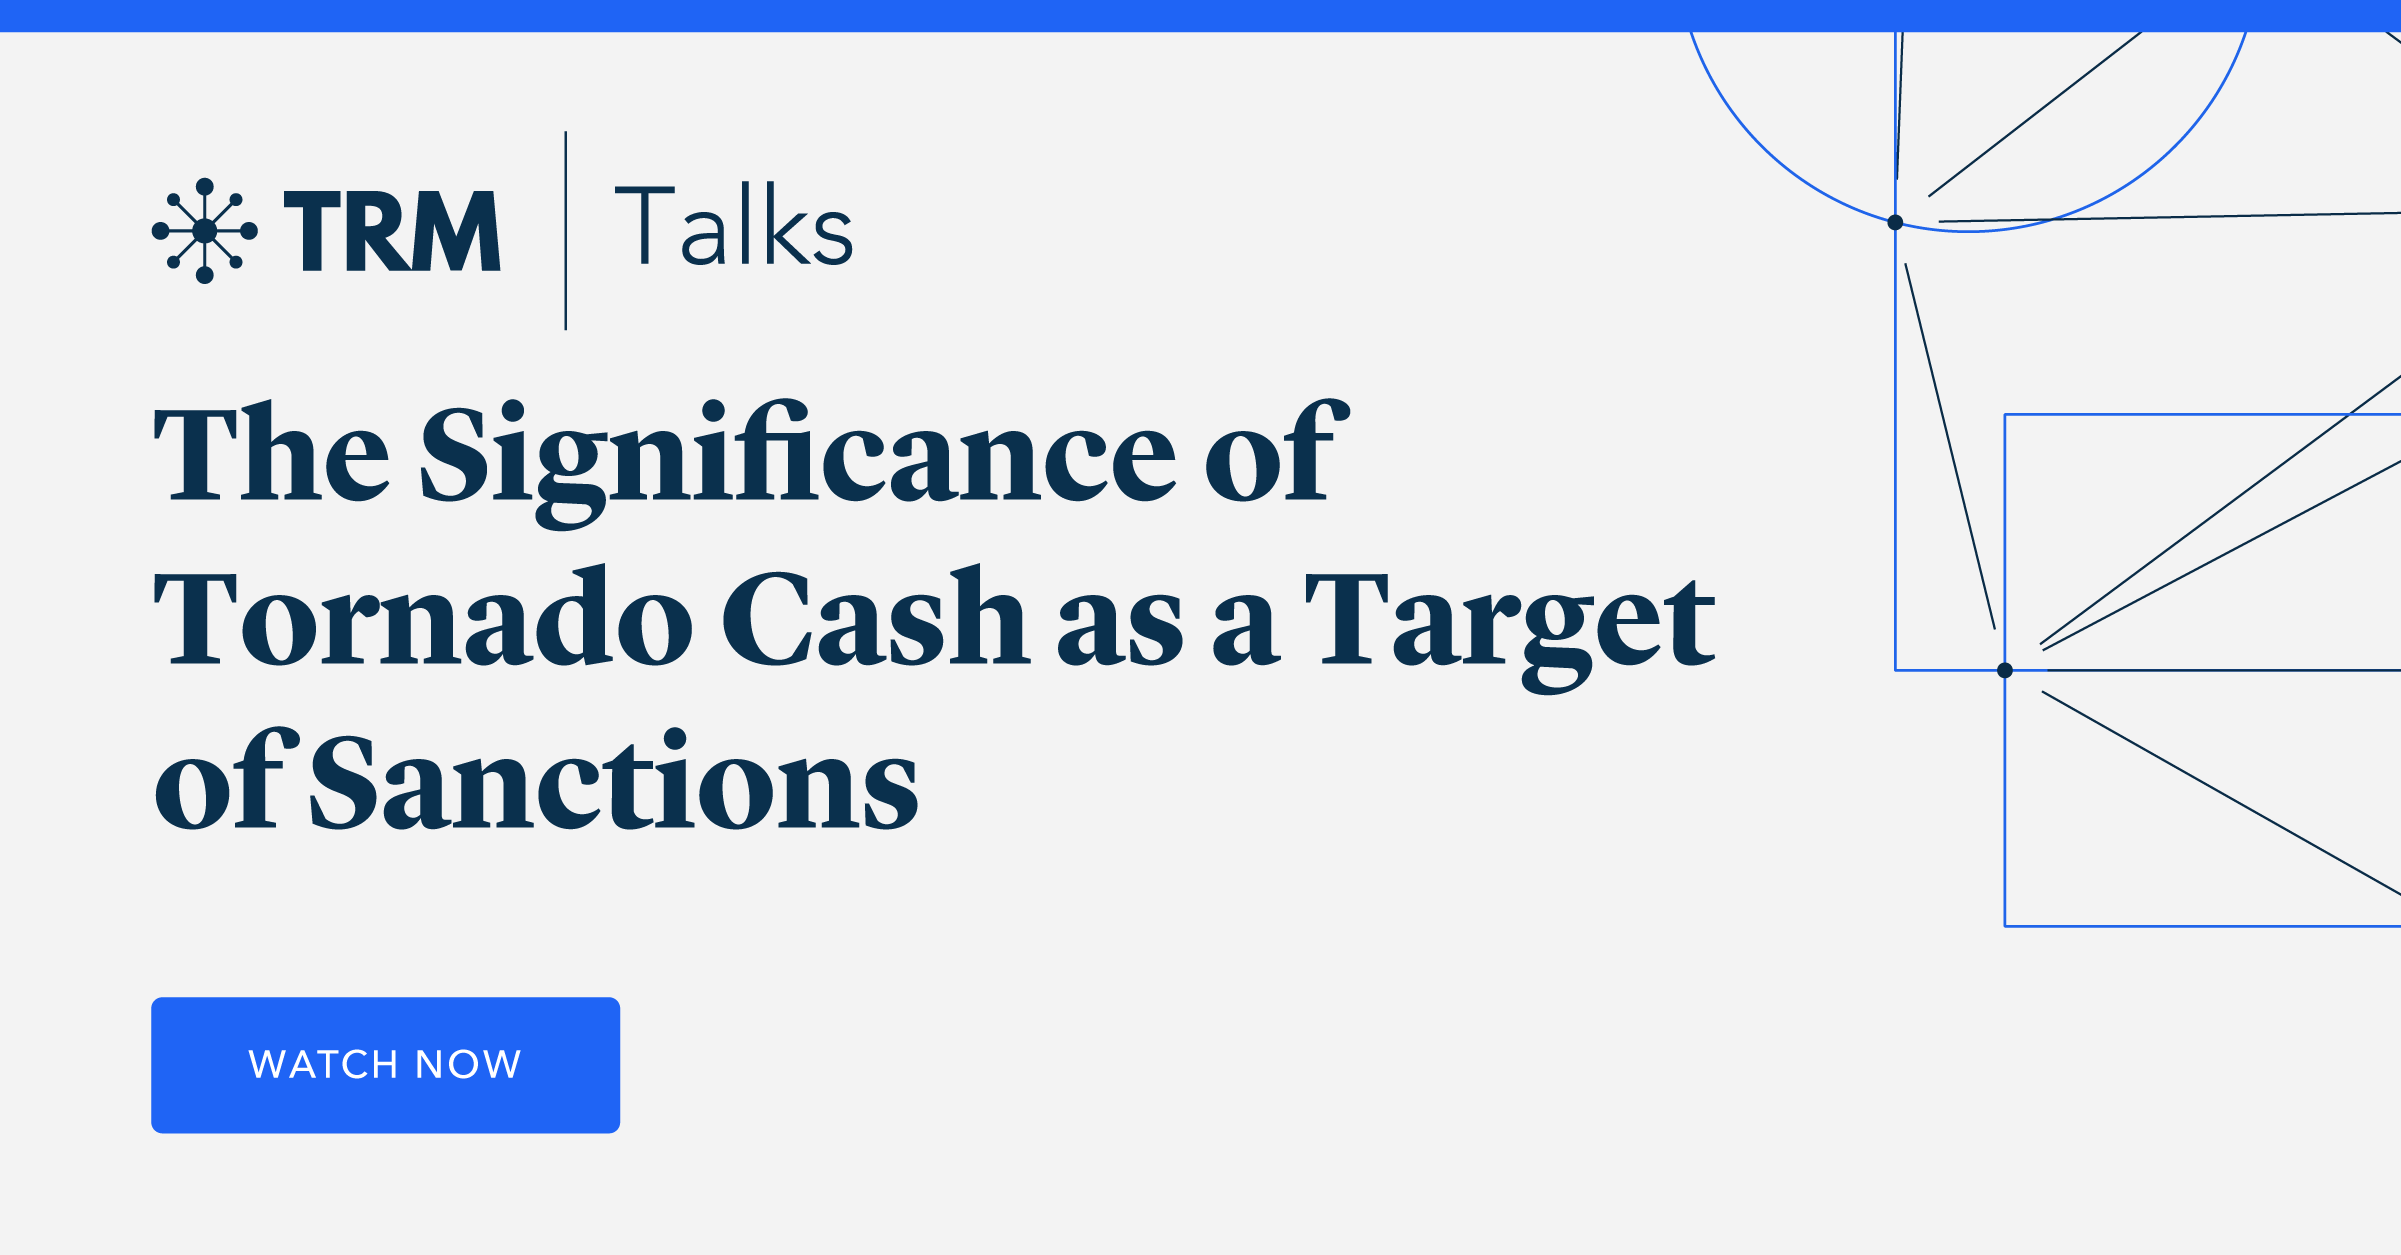 The Significance of Tornado Cash as a Target of Sanctions